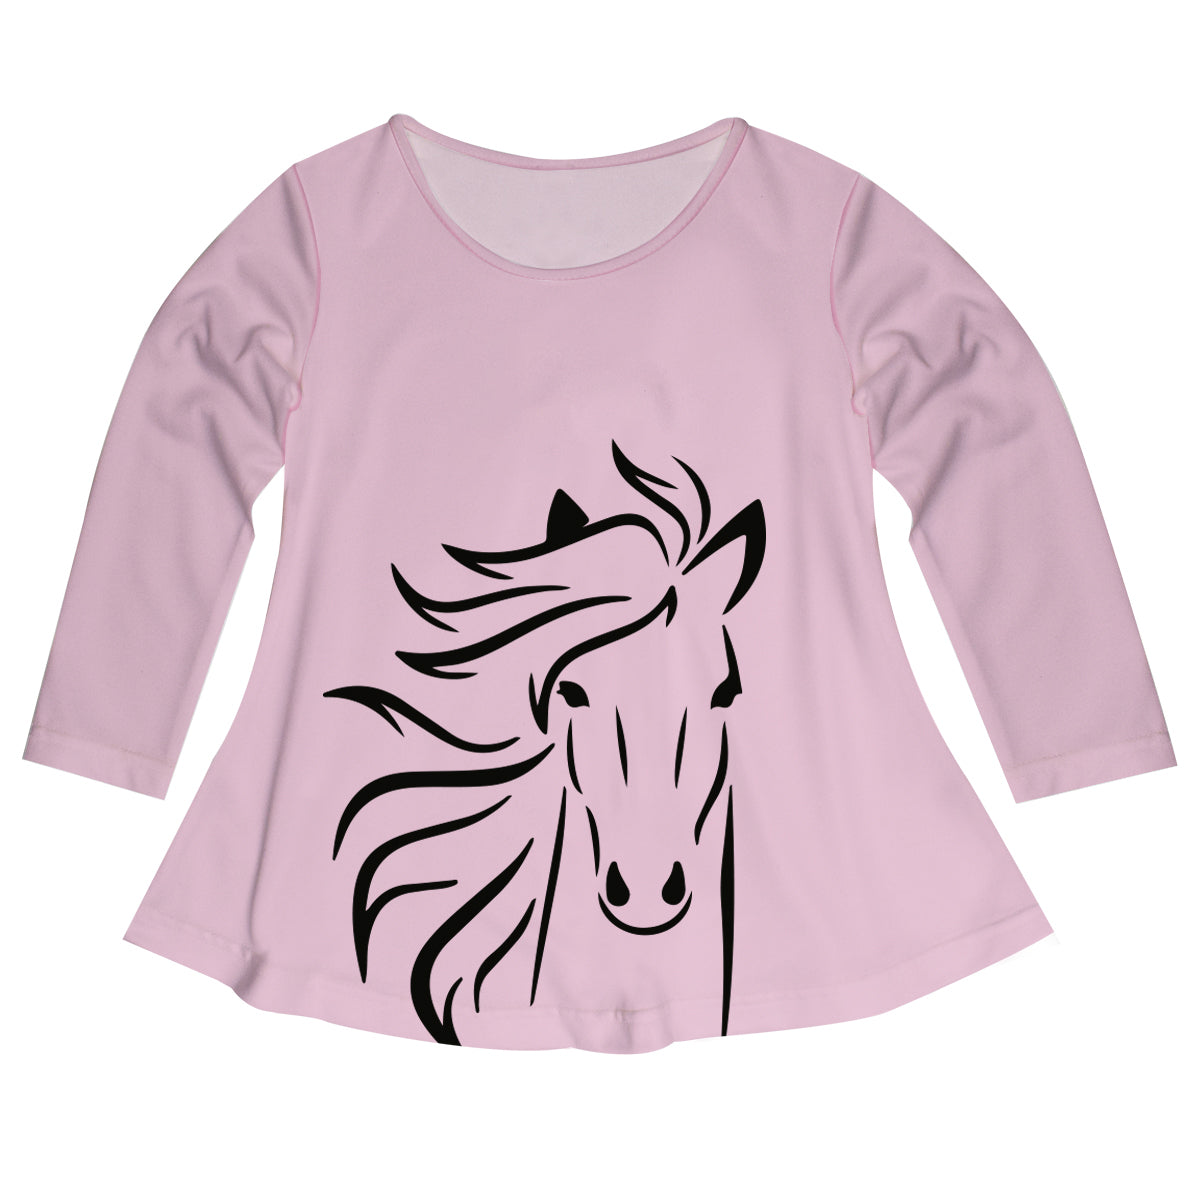 Light pink long sleeve blouse with horse and name - Wimziy&Co.